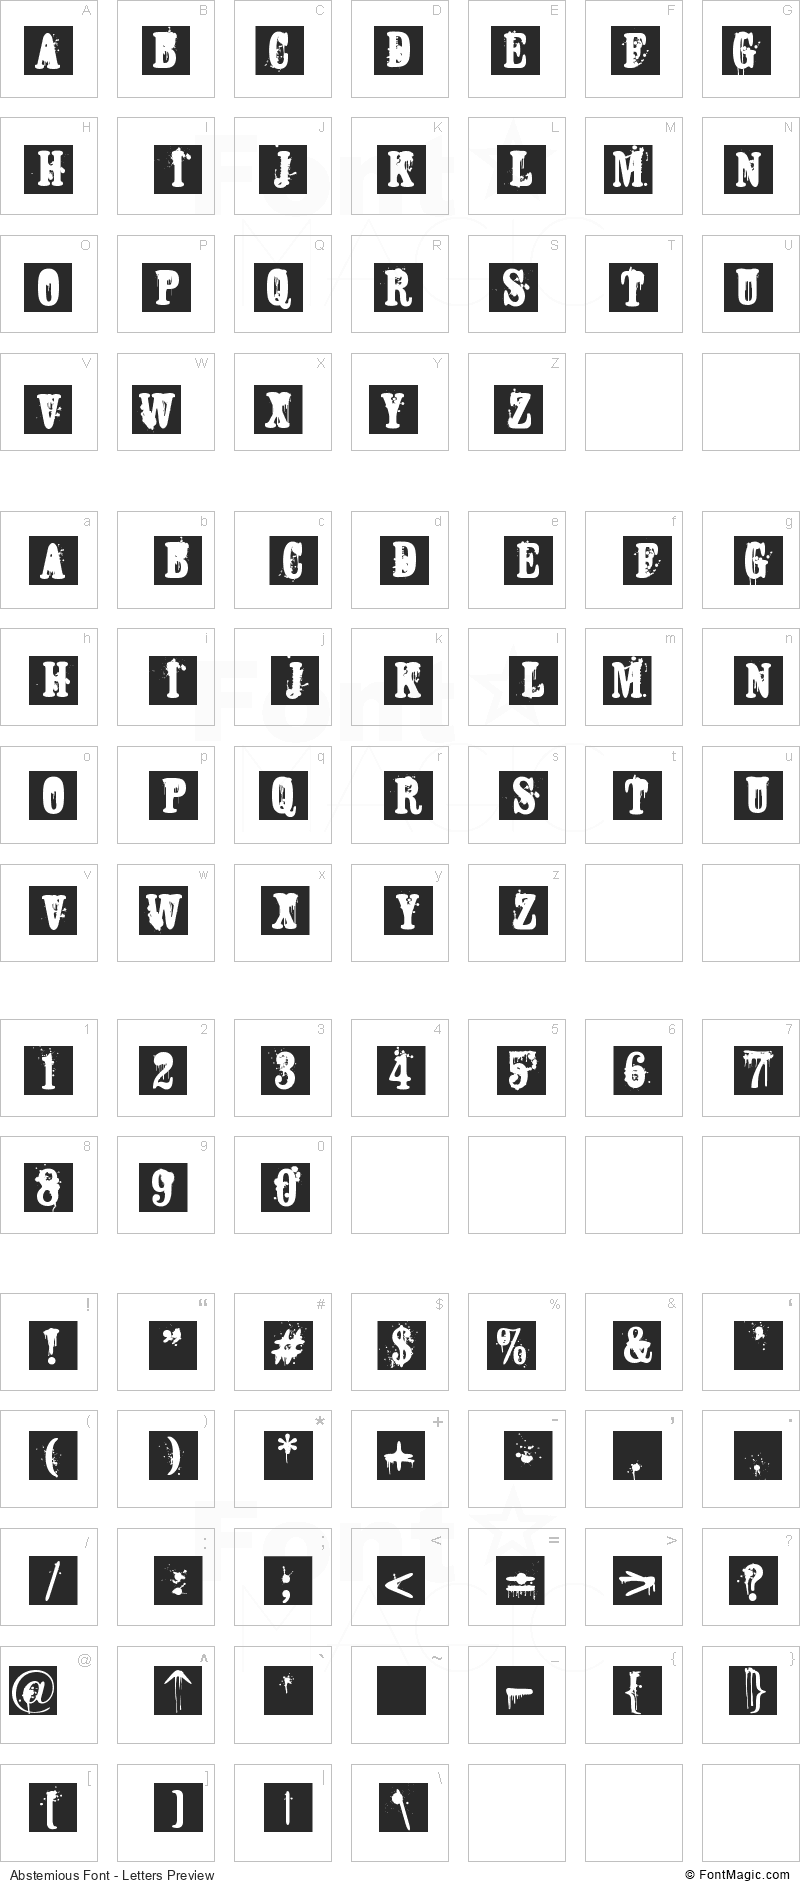 Abstemious Font - All Latters Preview Chart